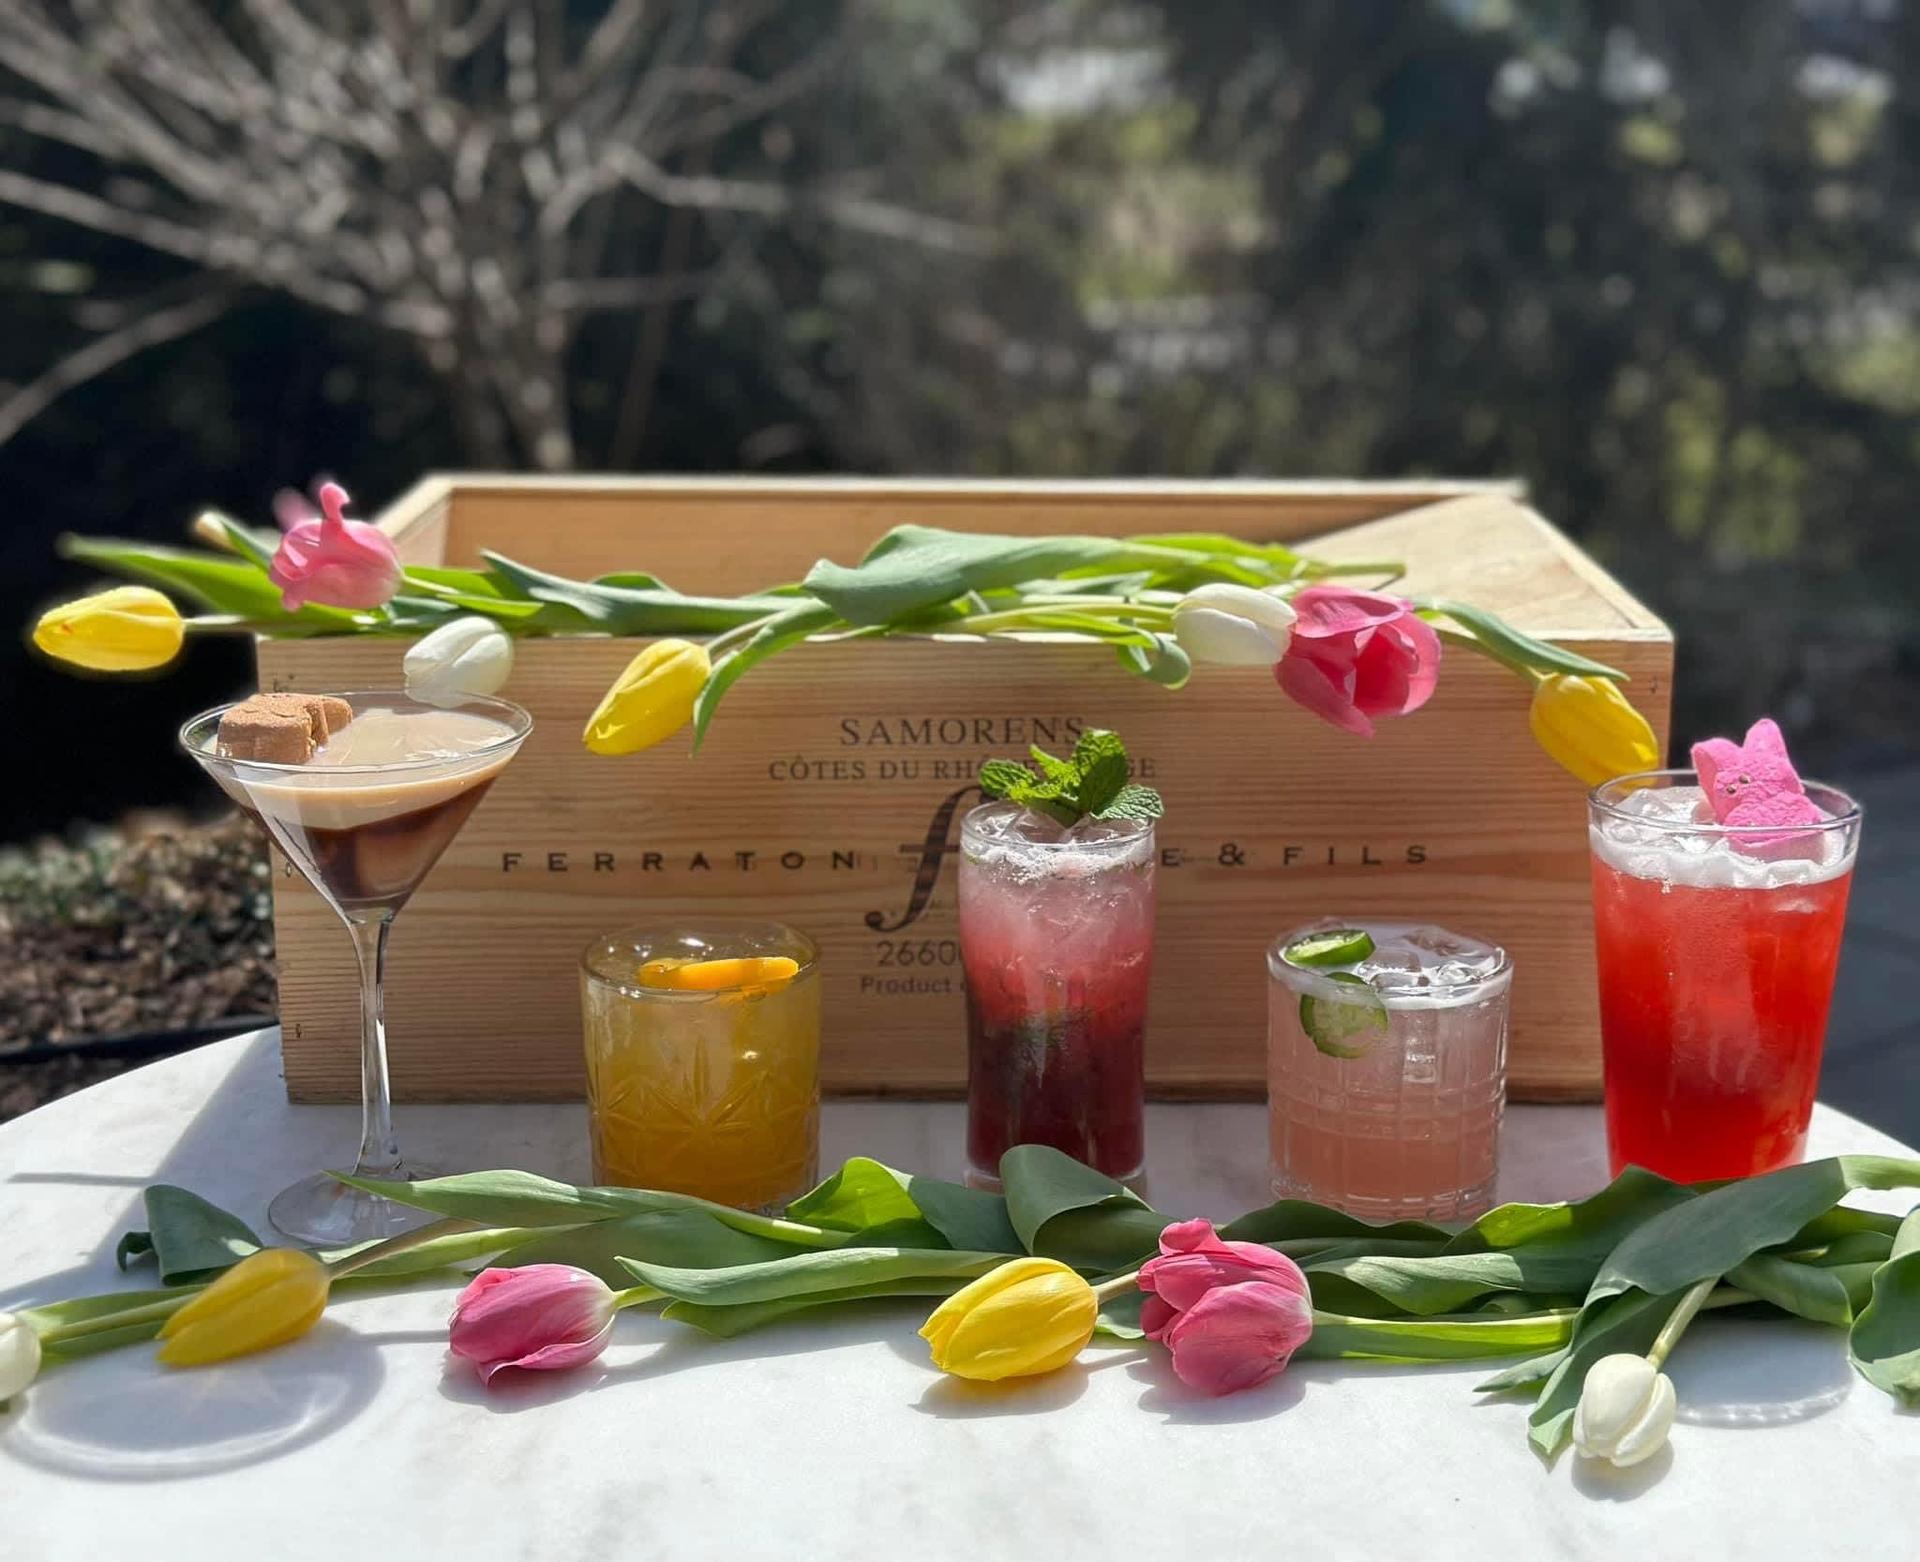 Spring Is Here! 

Stay Tuned For New Food & Cocktail Menus!